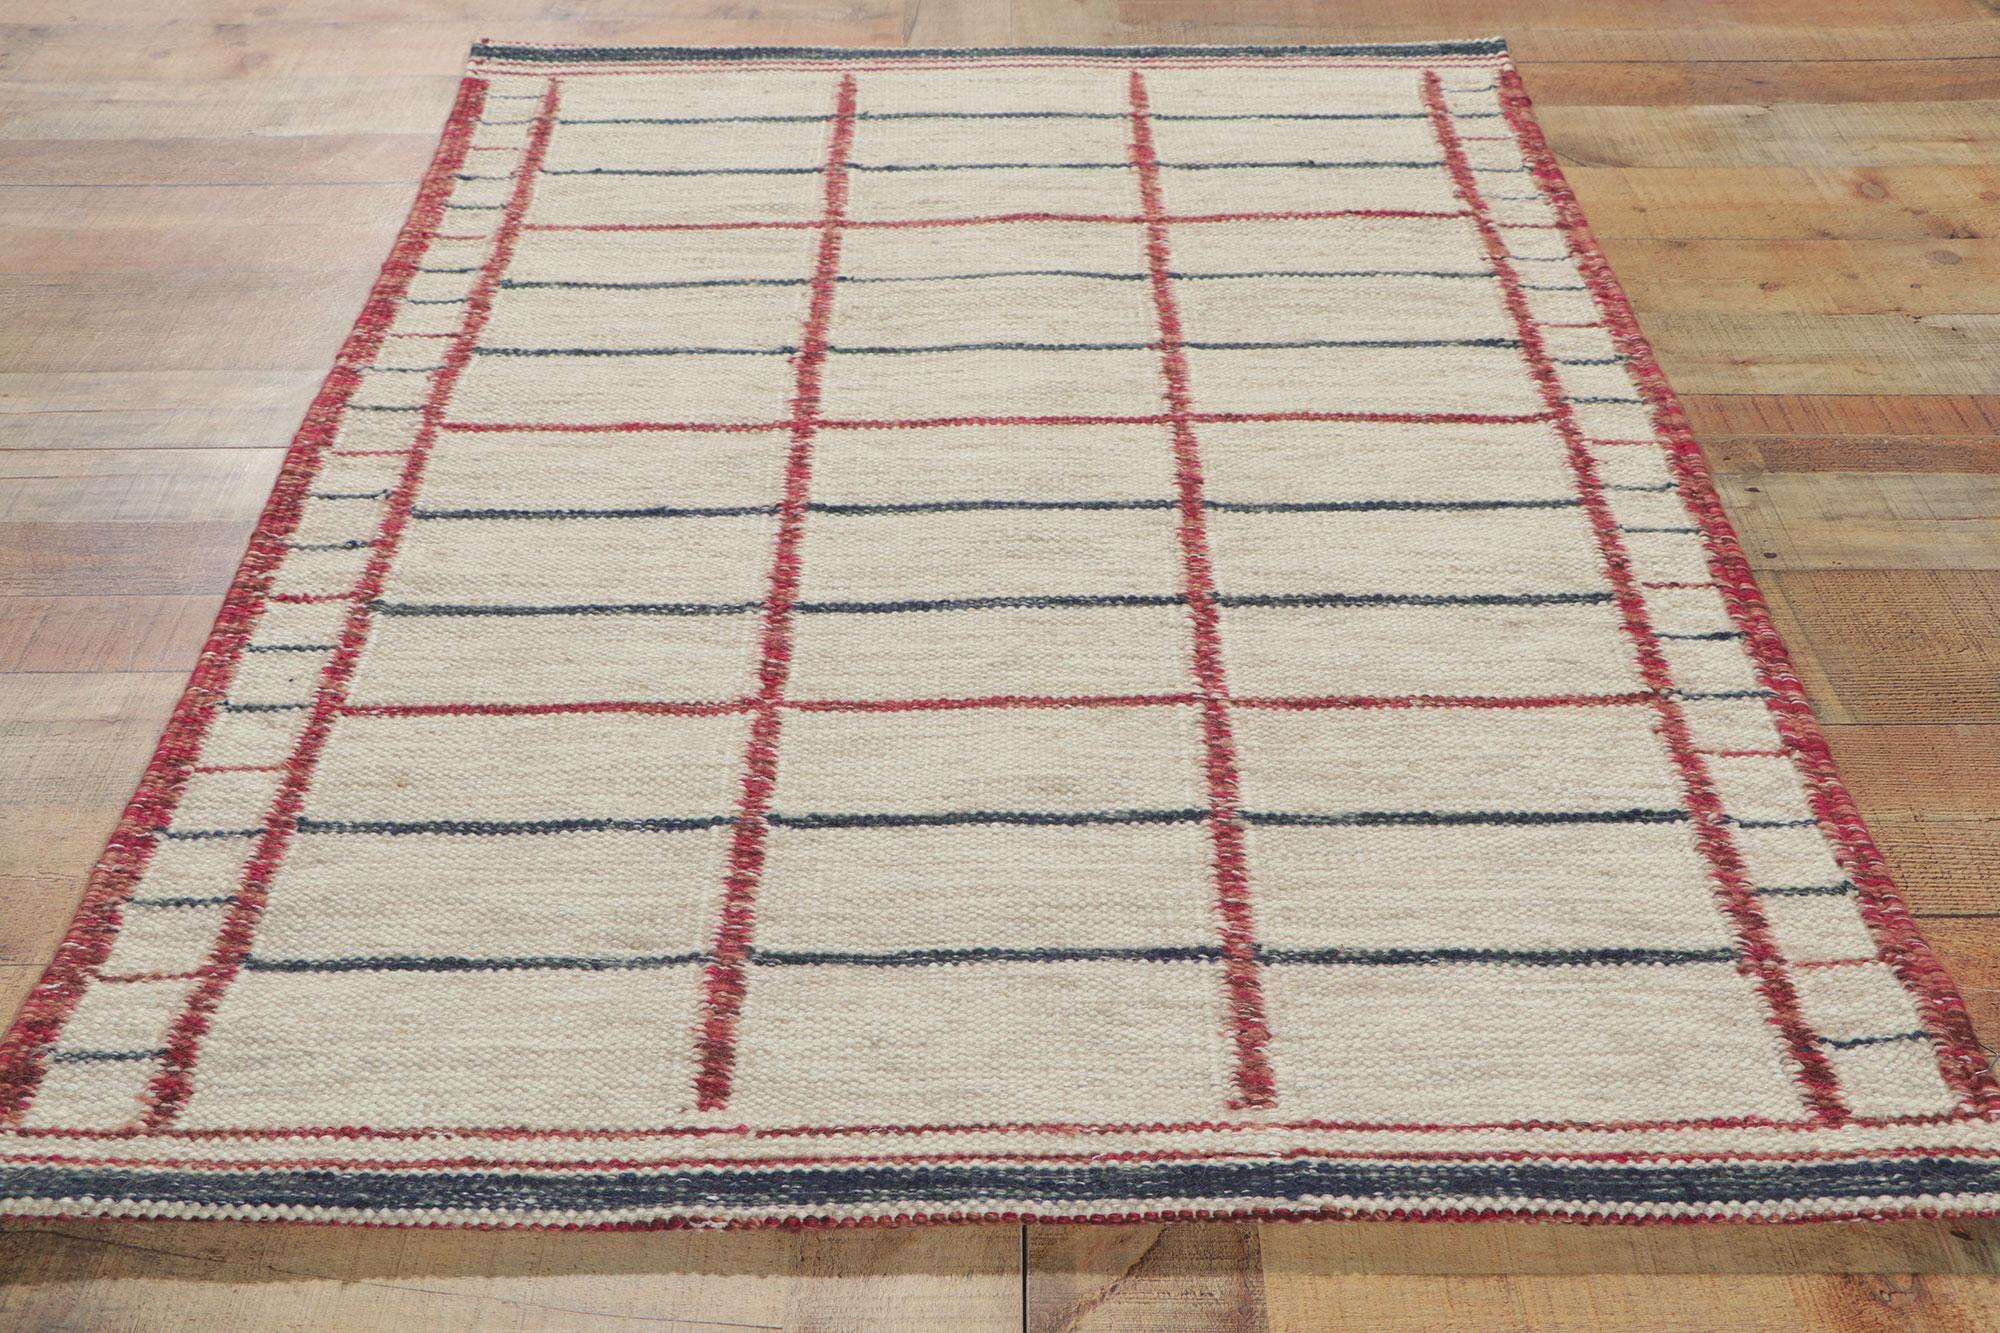 Pair of Matching Swedish Inspired Kilim Rugs with Scandinavian Modern Style For Sale 5